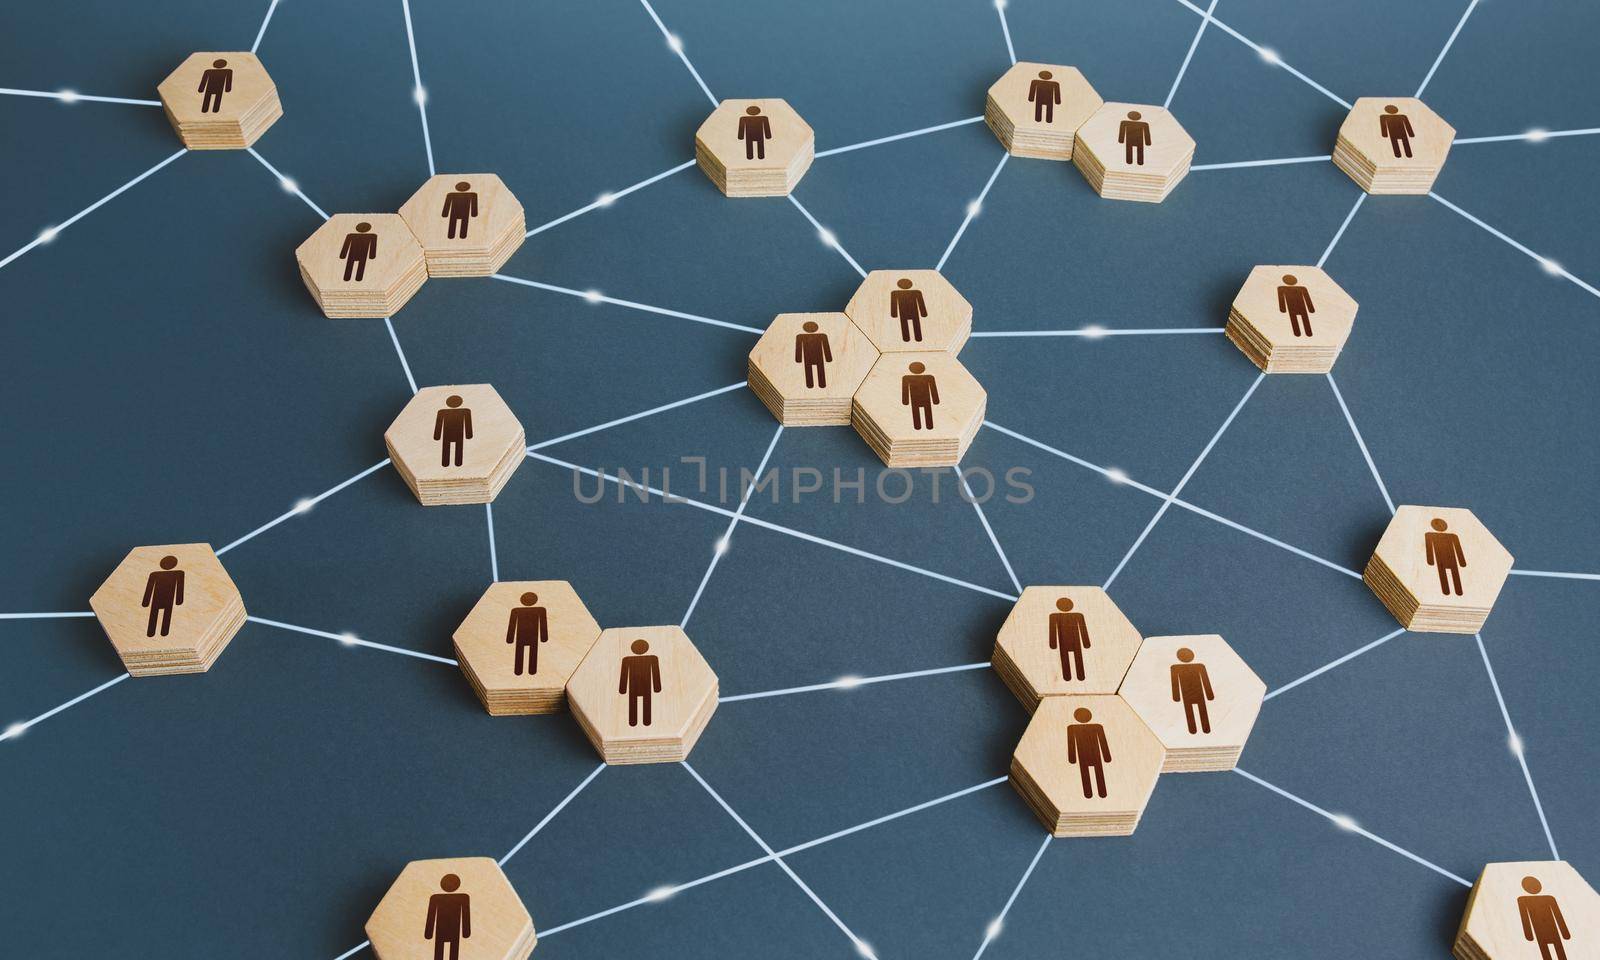 Network of interconnected people. Interactions between employees and working groups. Social business connections. Networking communication. Decentralized hierarchical system of company. Organization by iLixe48